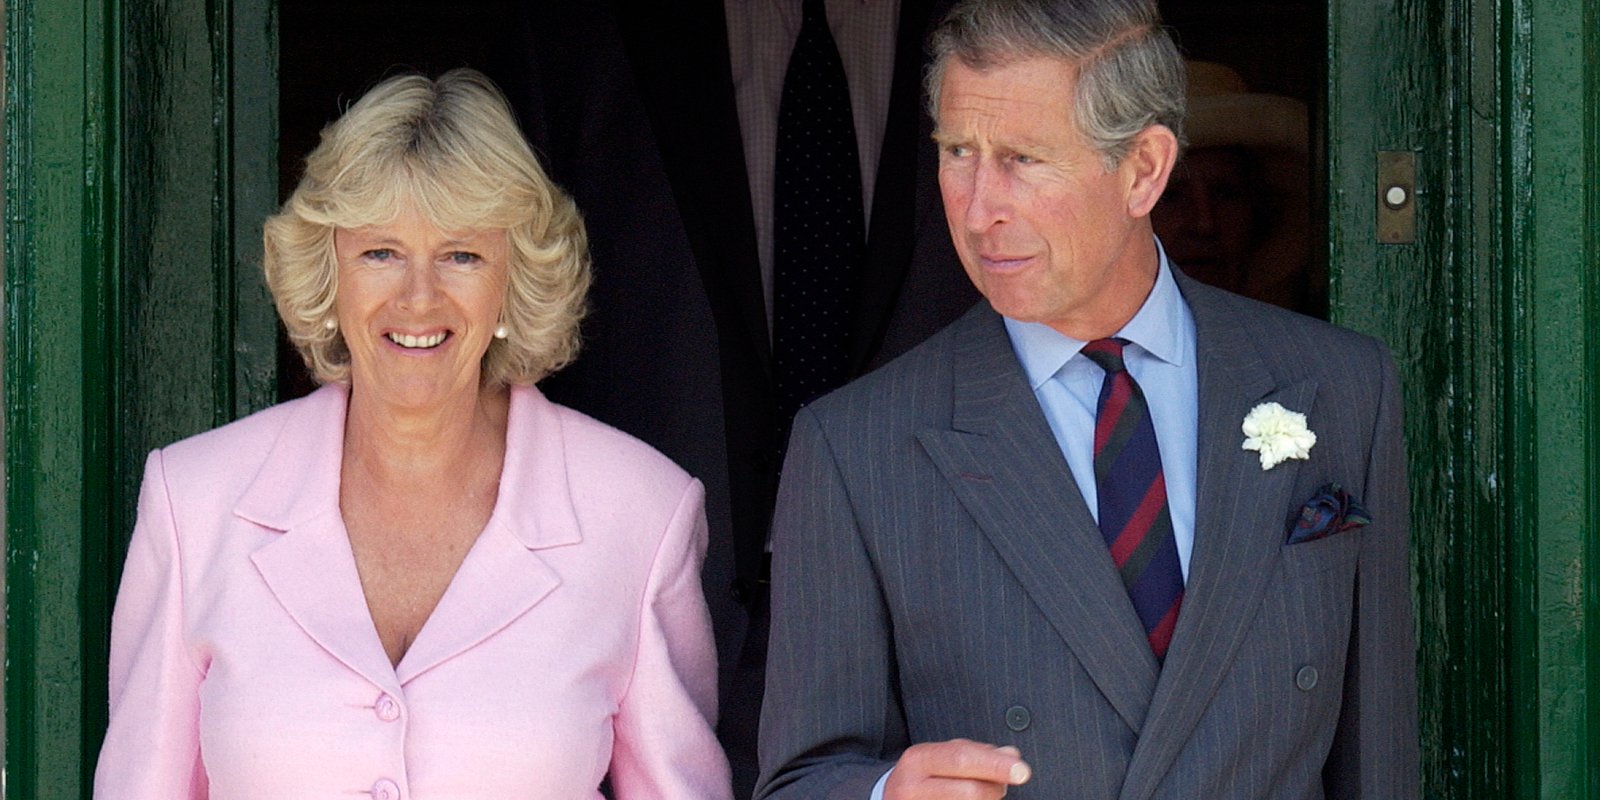 King Charles III's Ex-Girlfriend Introduced Him to Camilla Parker Bowles